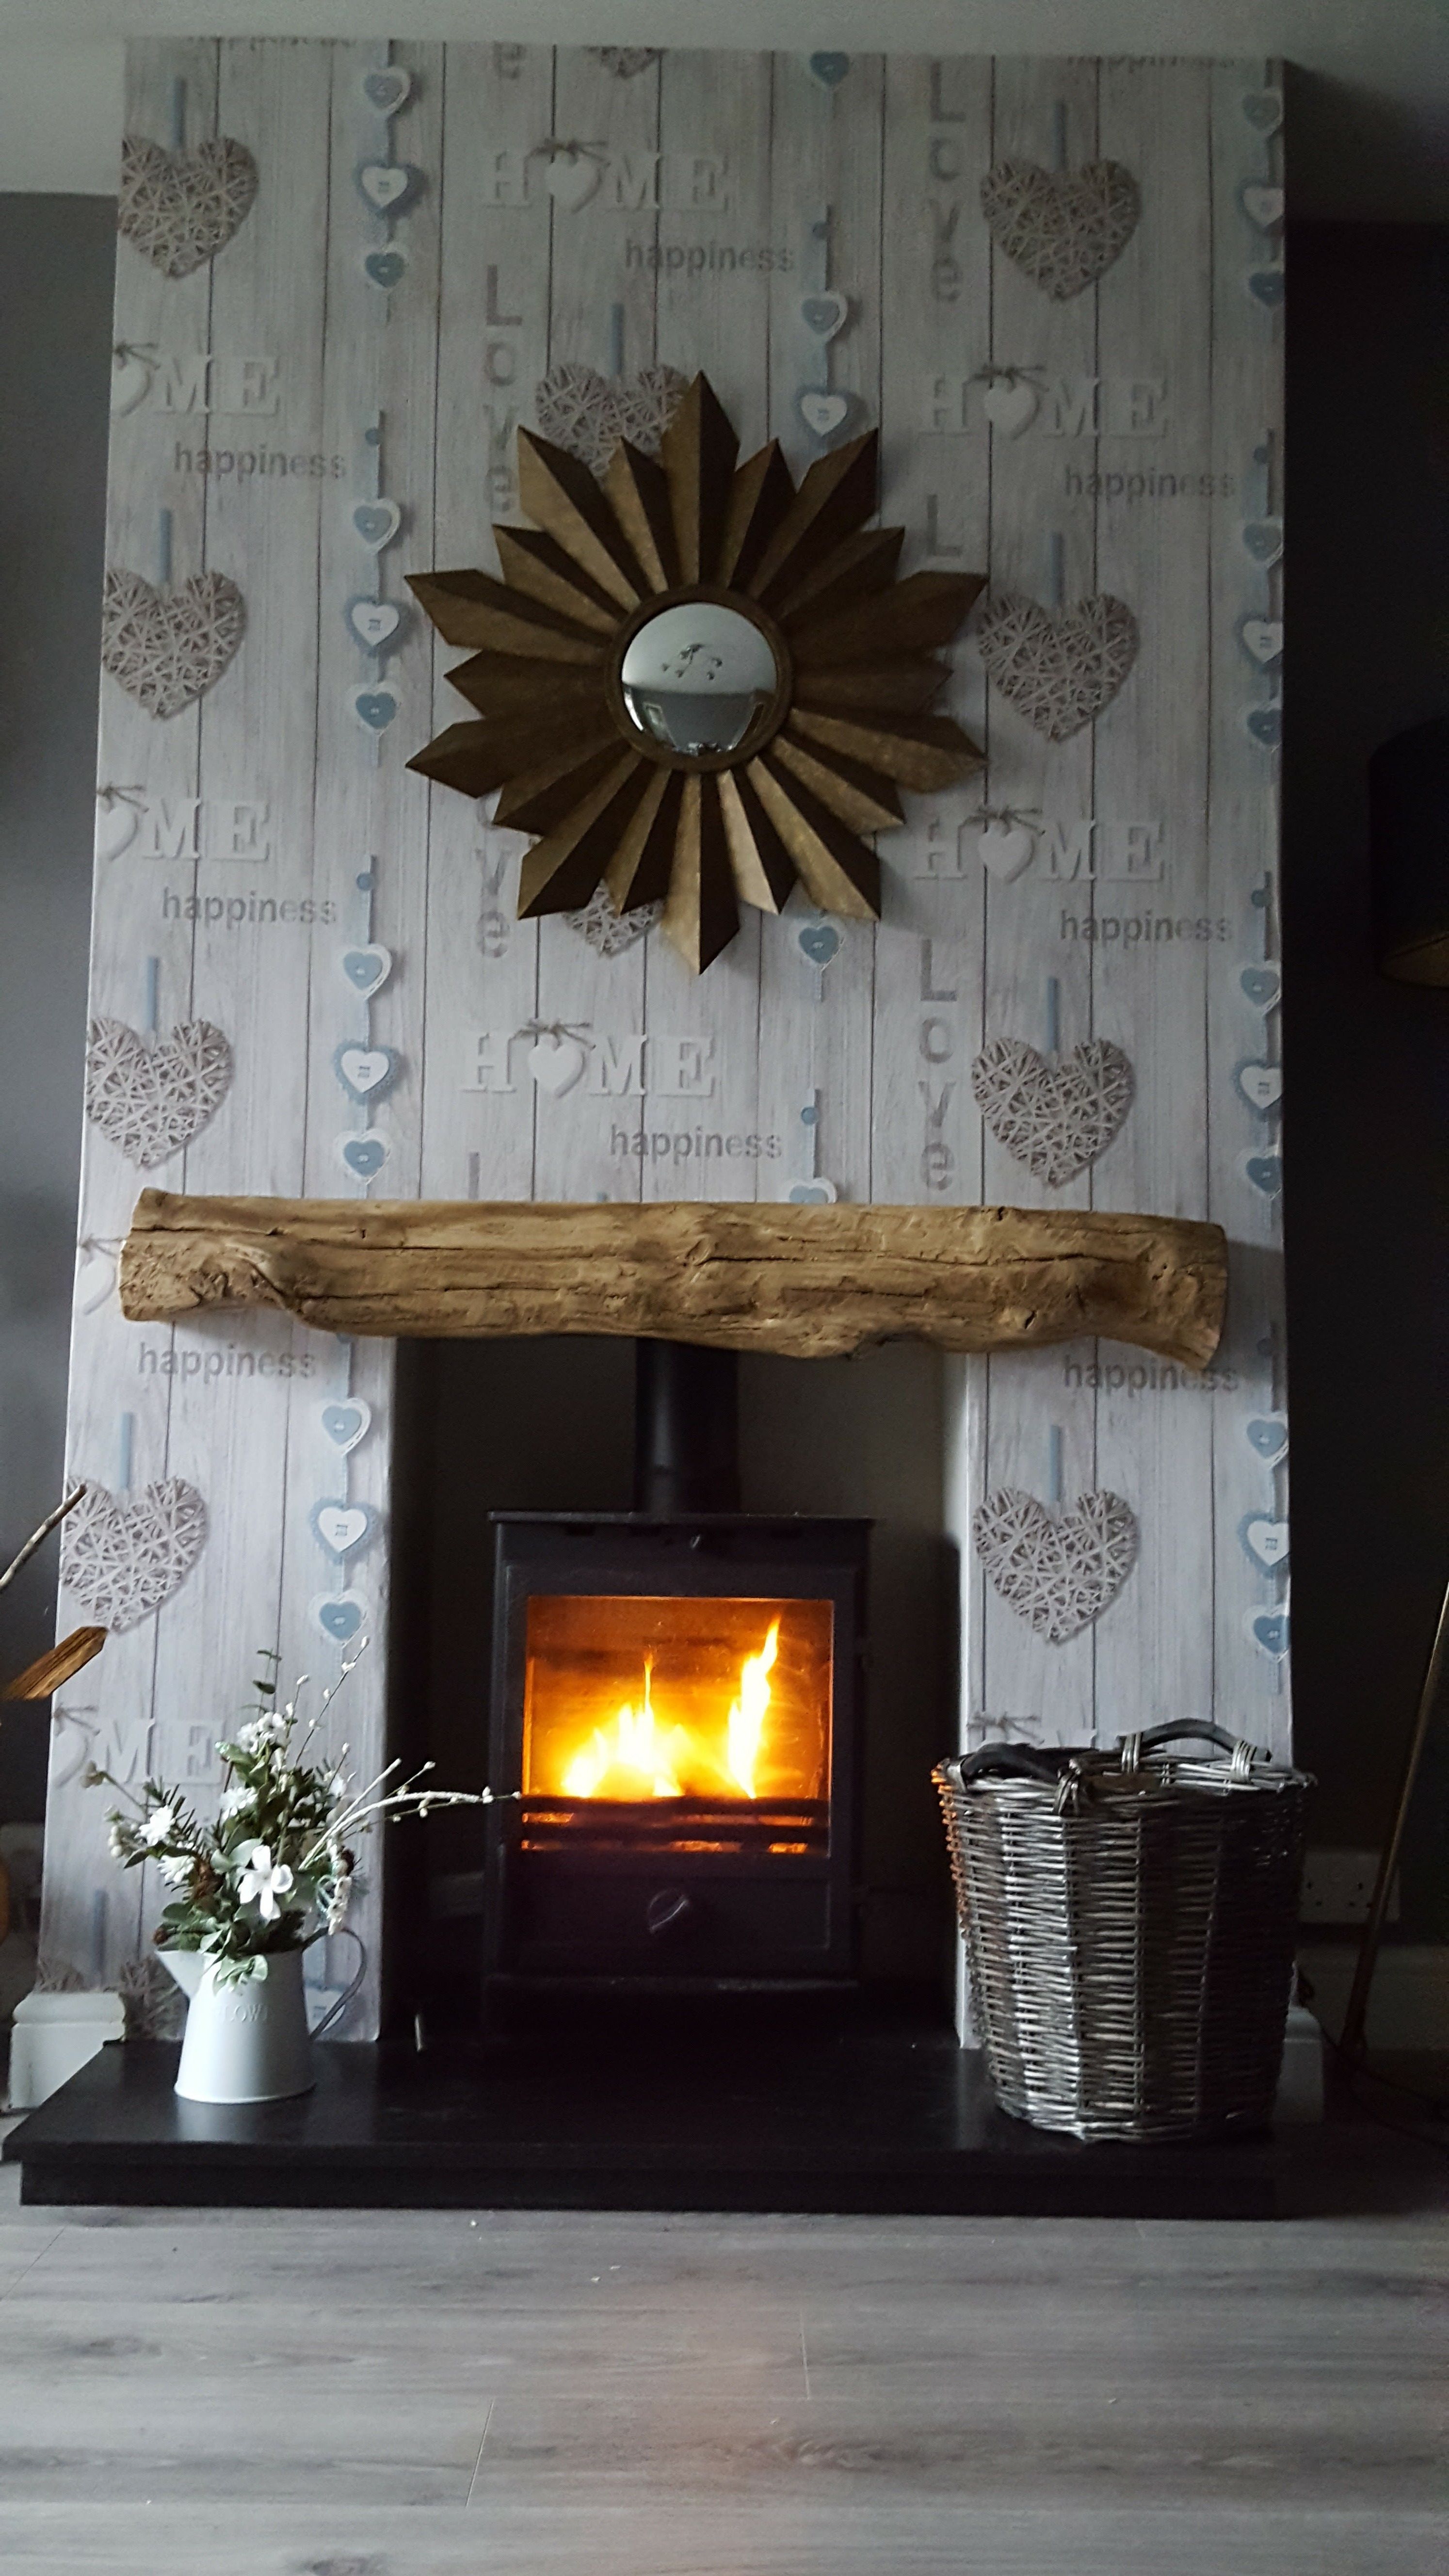 Installed this lovely wood burner and wallpapered chimney breast